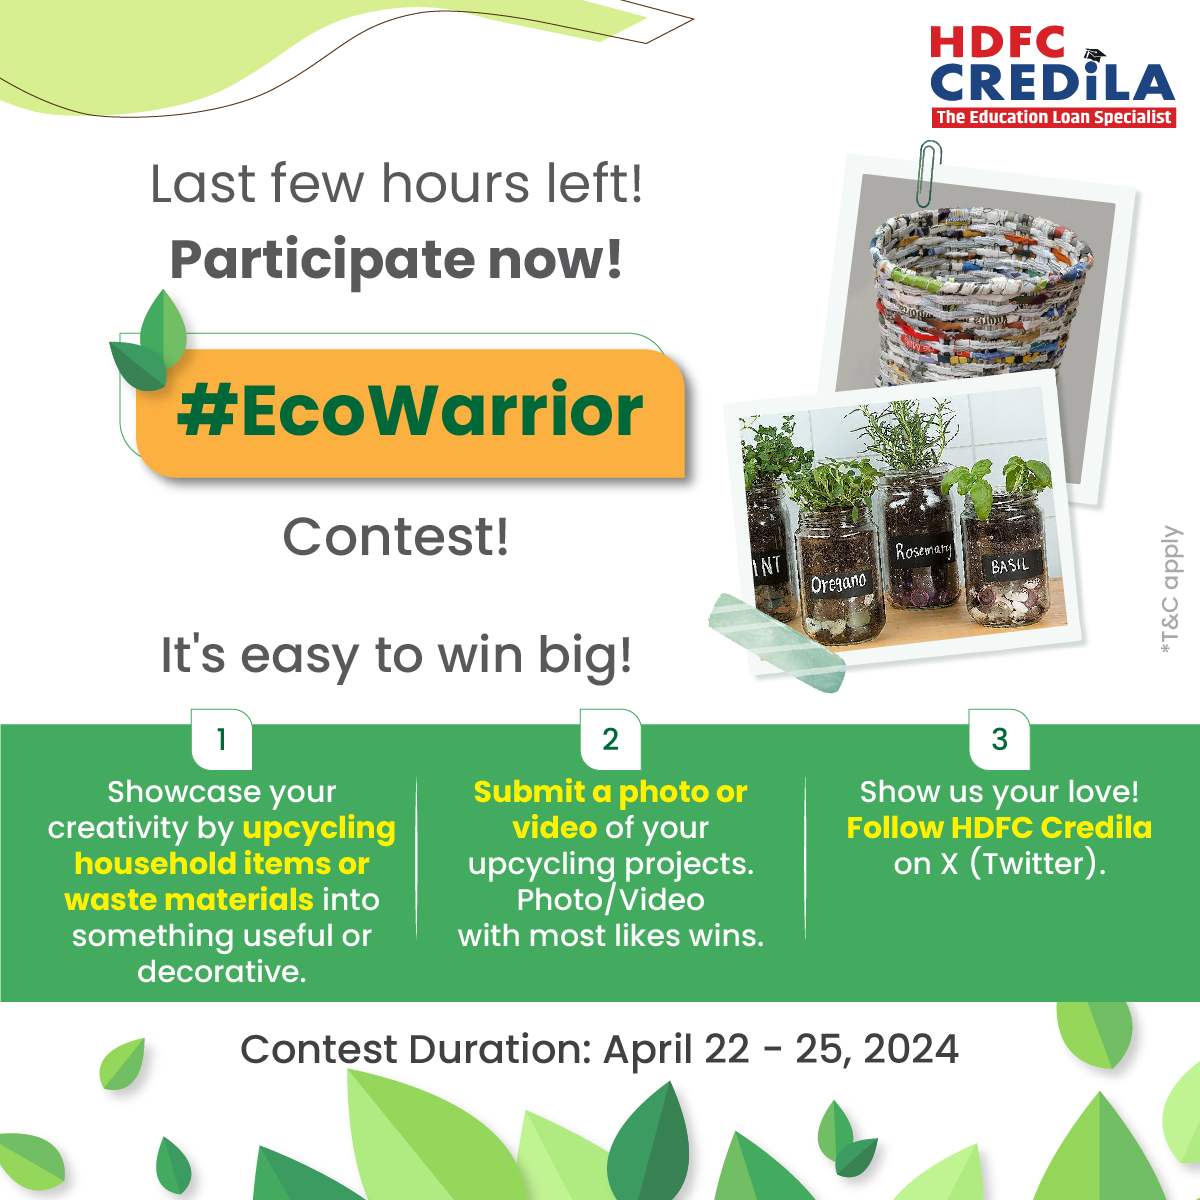 The clock is ticking! Have you sent in your entries? 

*T&C apply bit.ly/3UtjhLJ

#HDFCCredila #HDFCCredilaContest #EcoWarrior #WorldEarthDay #WorldEarthDay2024 #EarthDay #Earthday2024 #Contest #PhotoContest #VideoContest #ContestAlert #ContestTime #GiveAway…